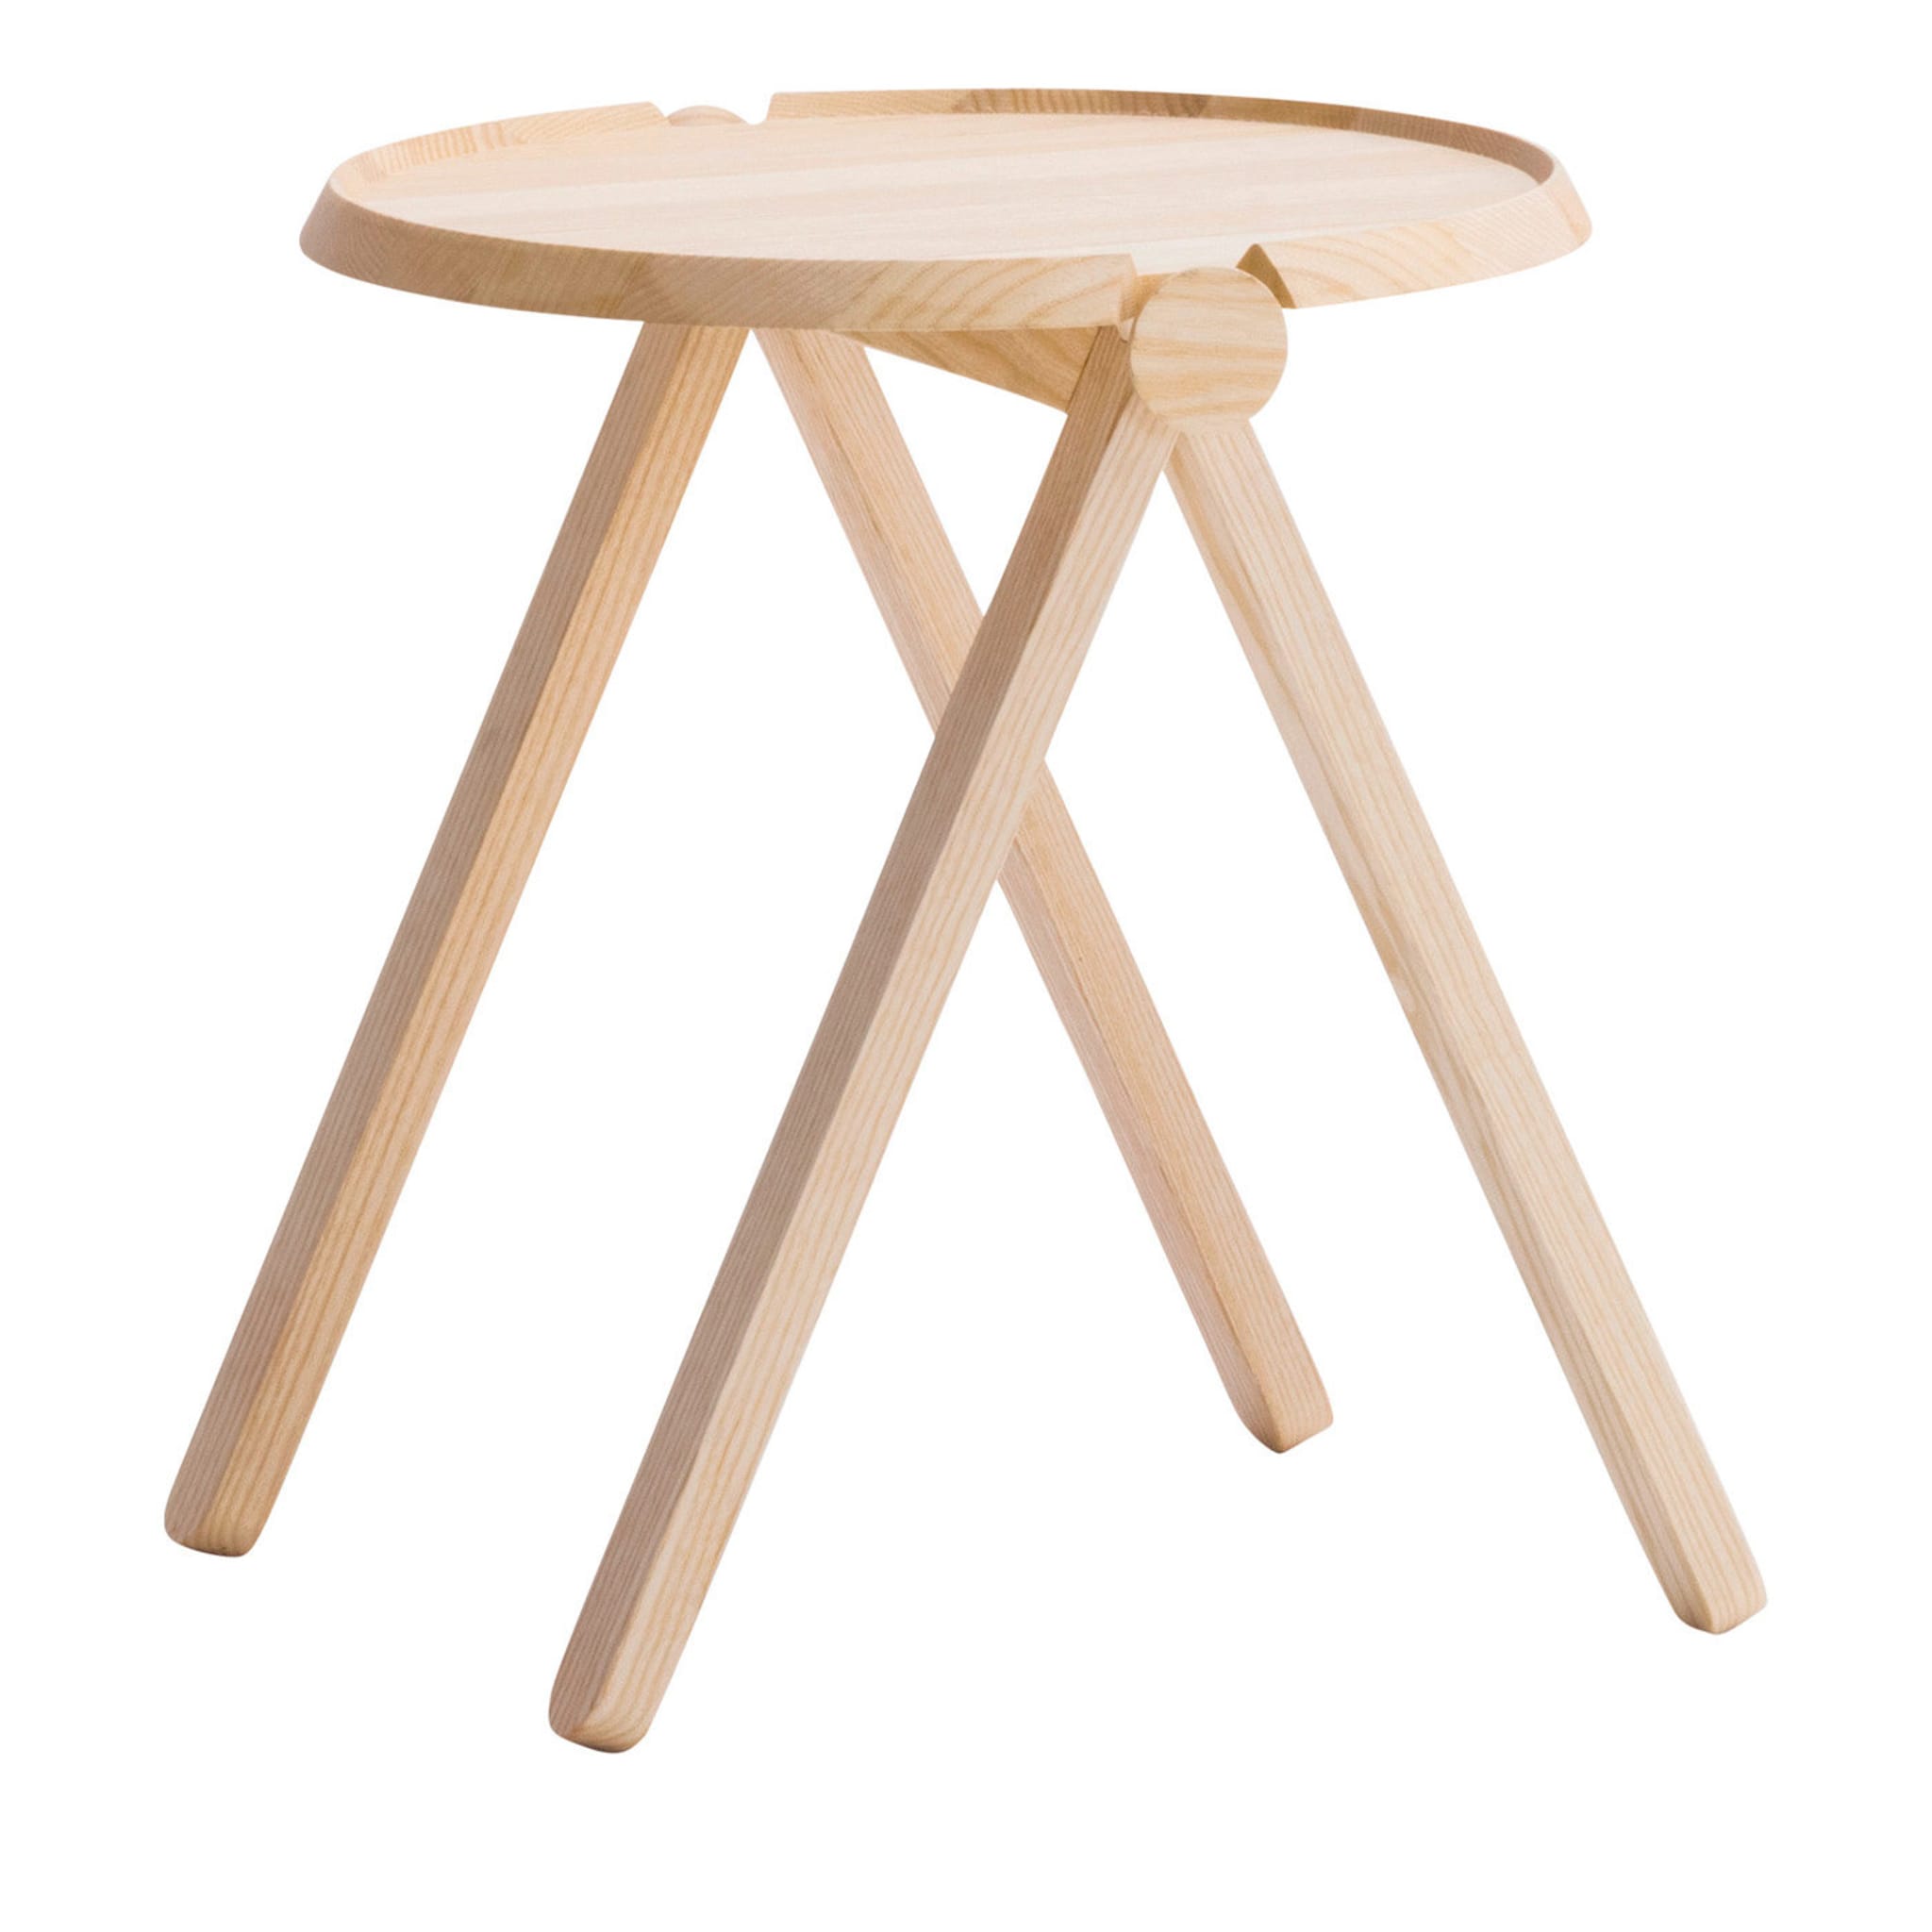 Lilliput Side Table by Studioventotto - Main view